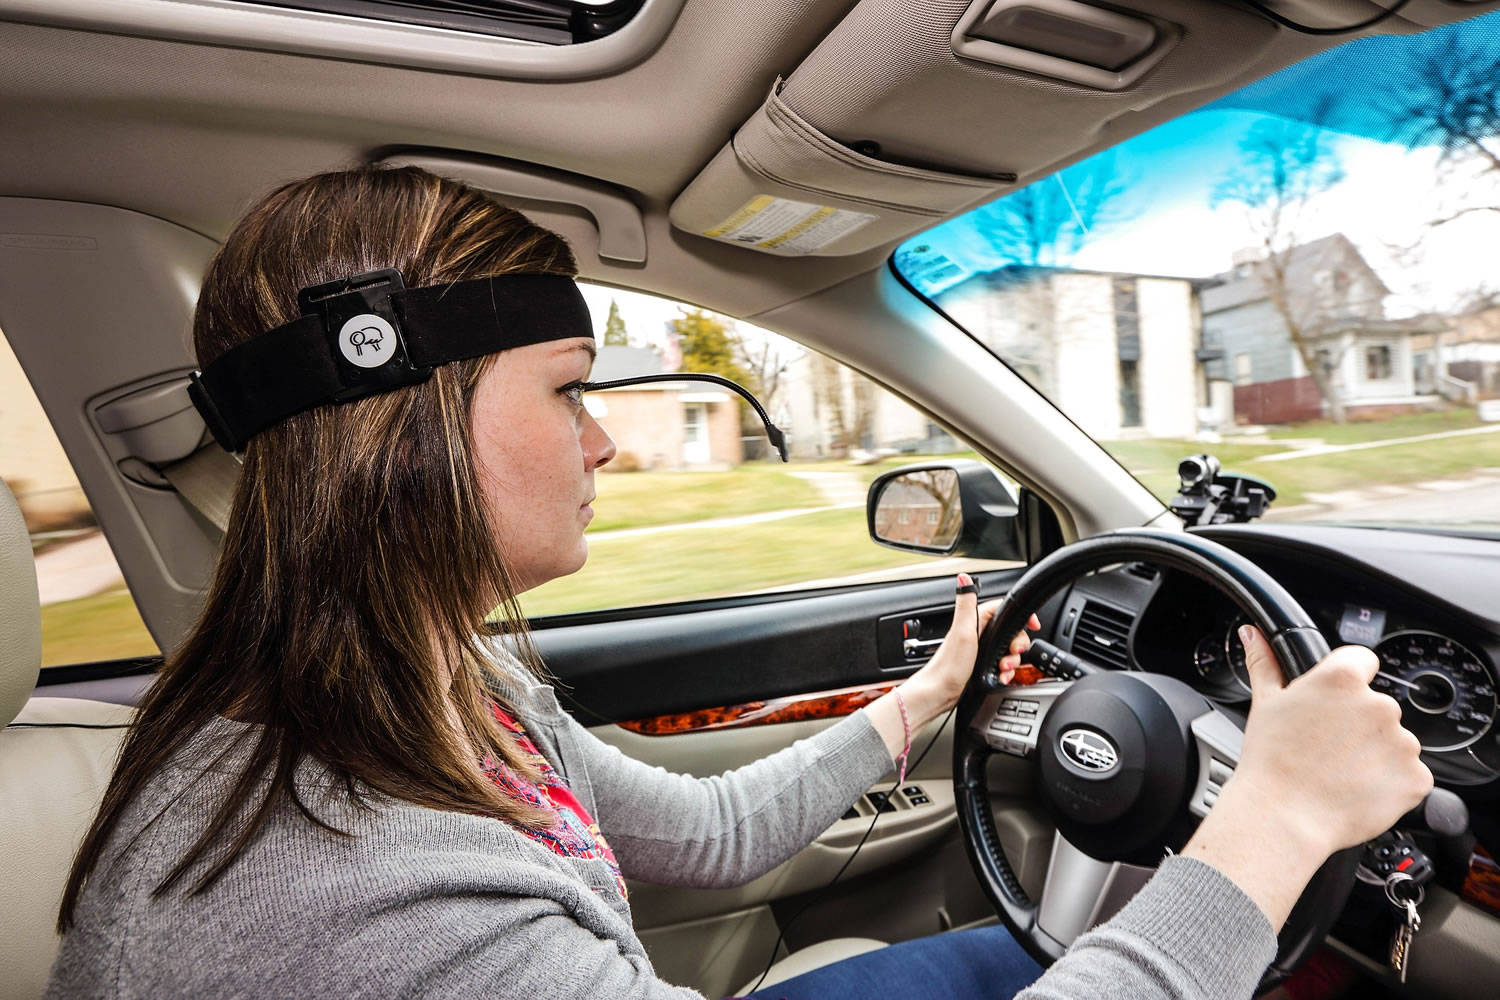 A driver during the Cognitive Distraction Phase II testing in Salt Lake City.